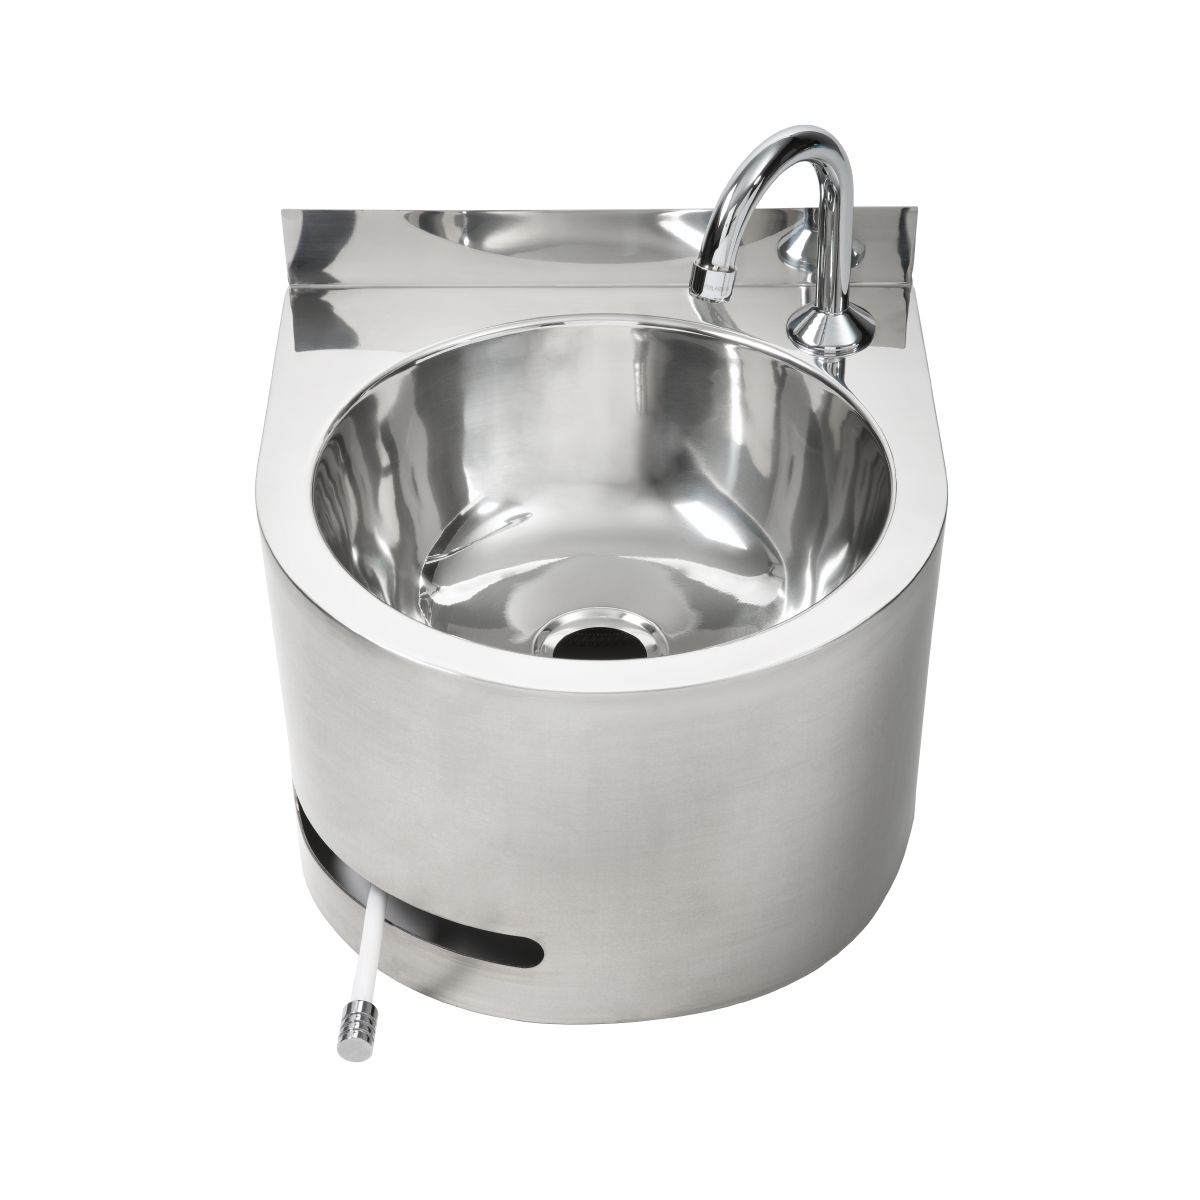 3monkeez AB-KNEEHB-RTMV Round Hands Free Knee Operated Stainless Steel BasinComplete with thermostatic mixing valve)